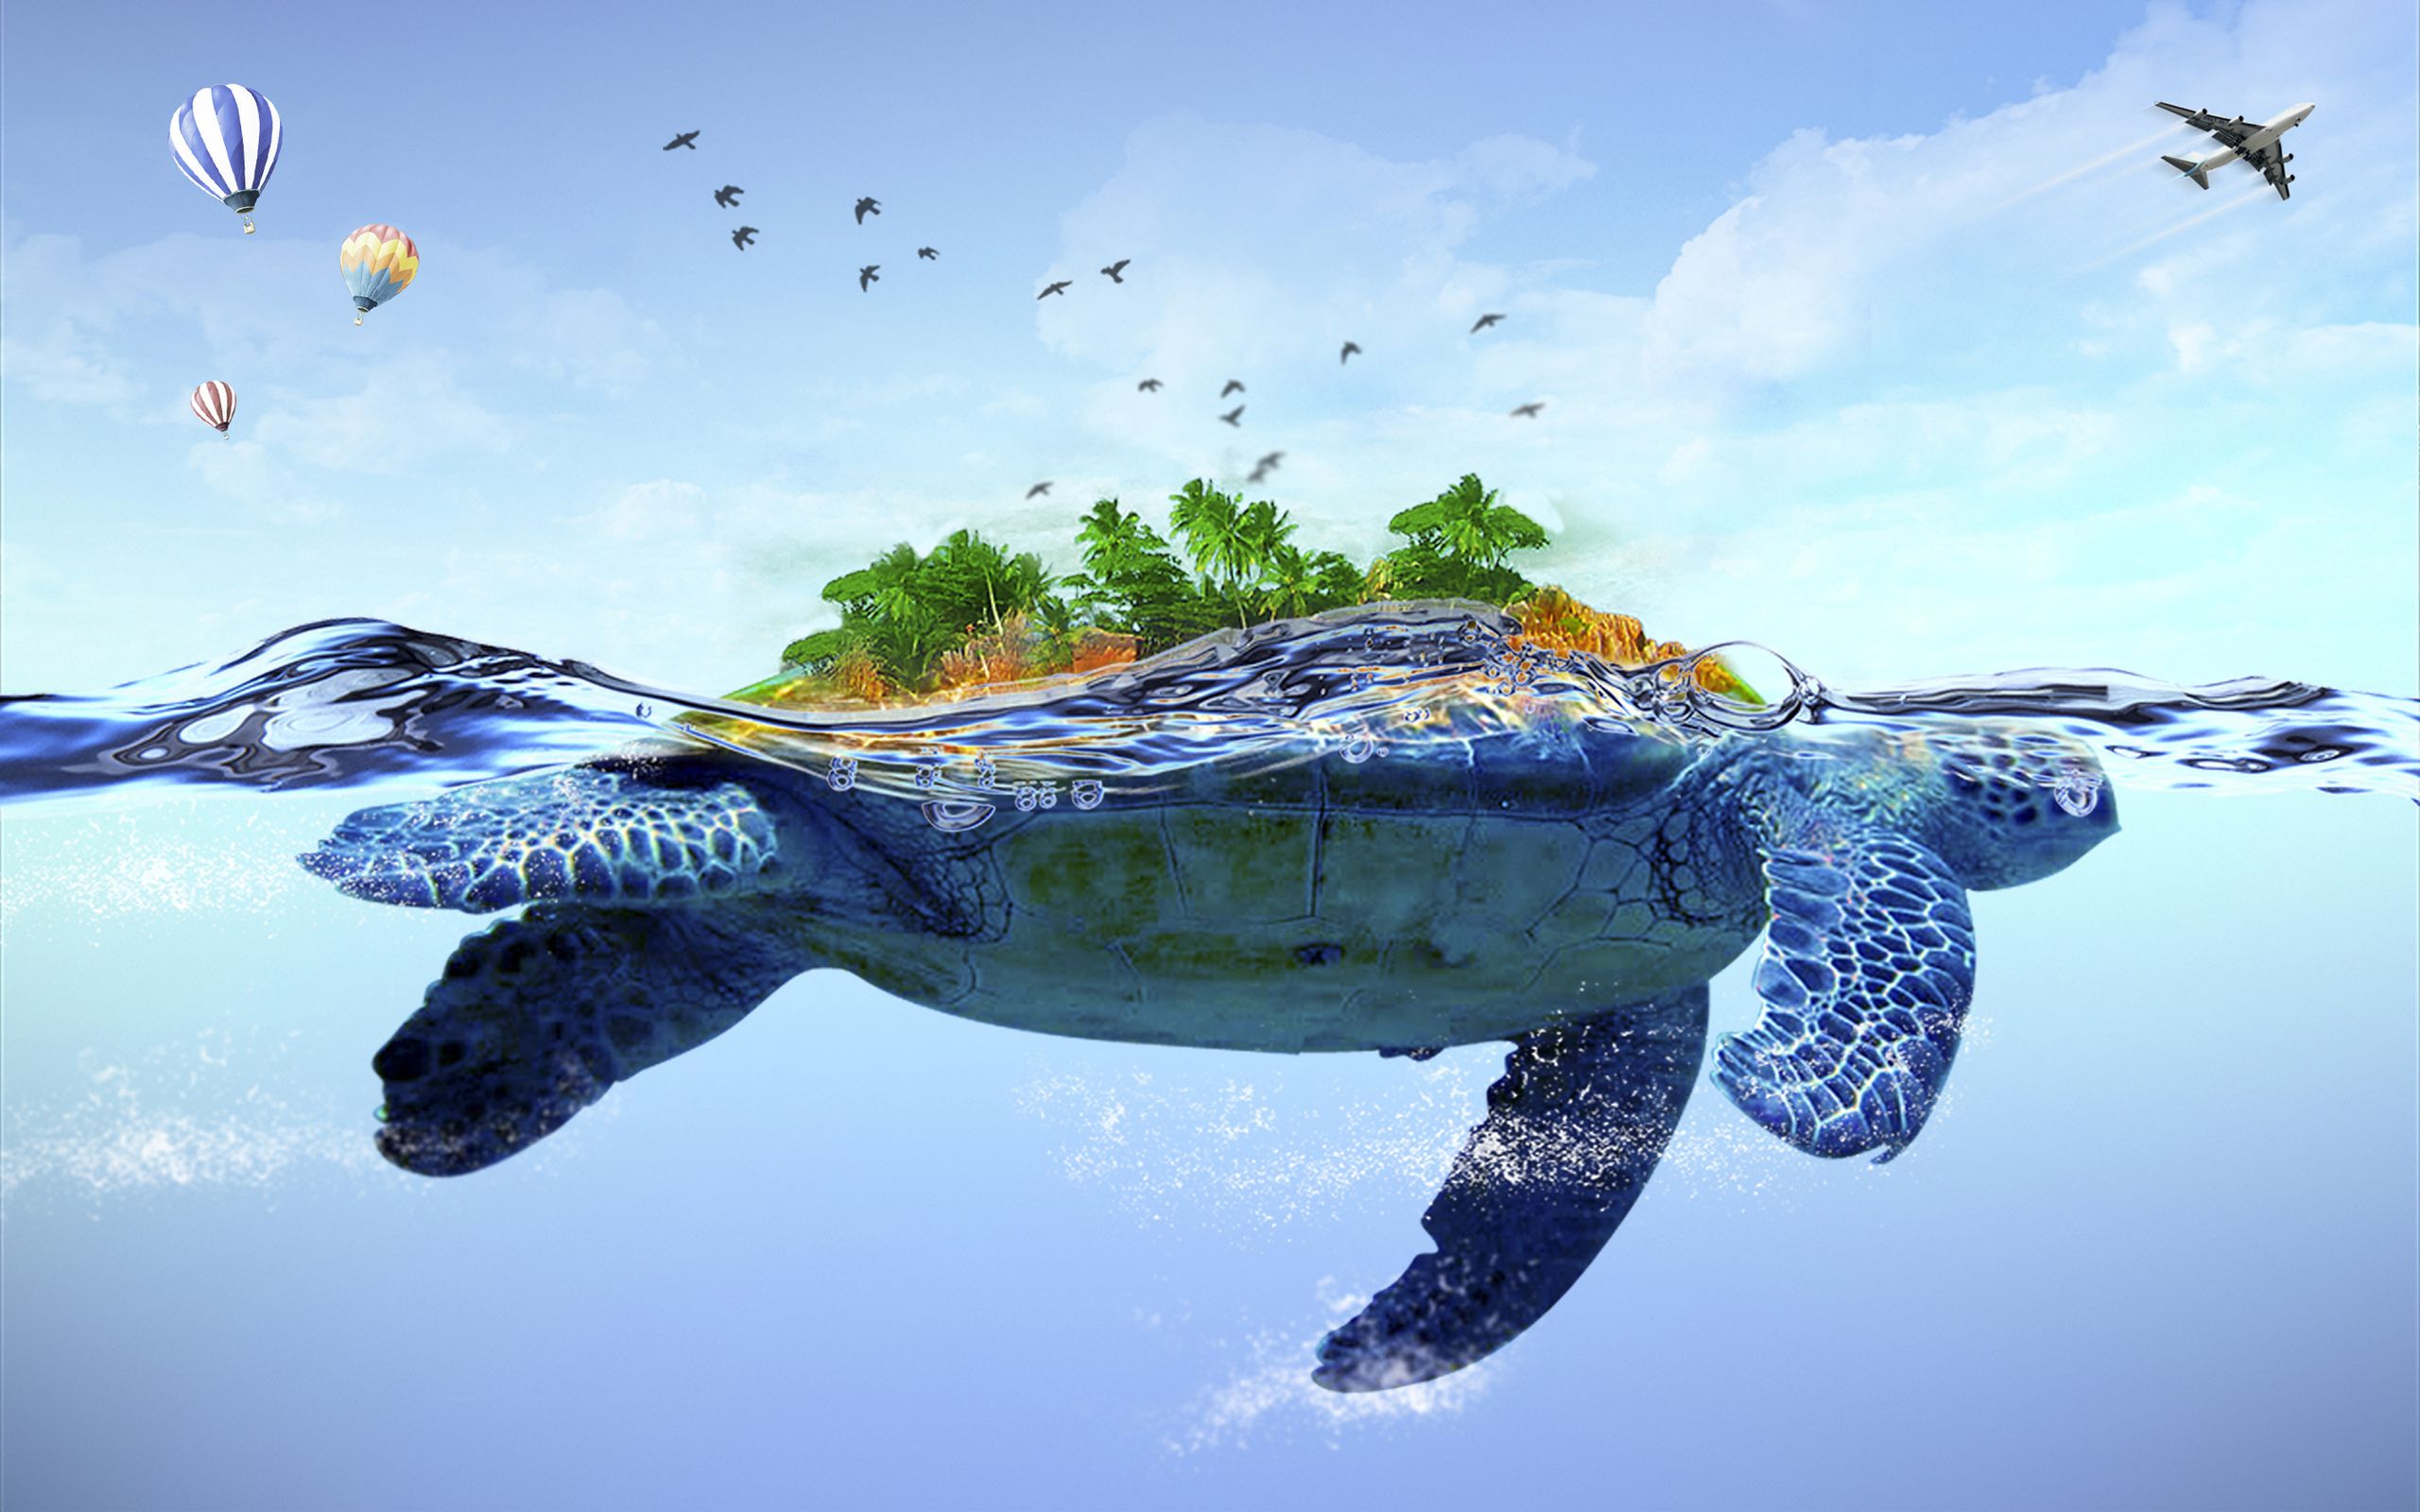 A turtle swims in the ocean with an island on its back. - Turtle